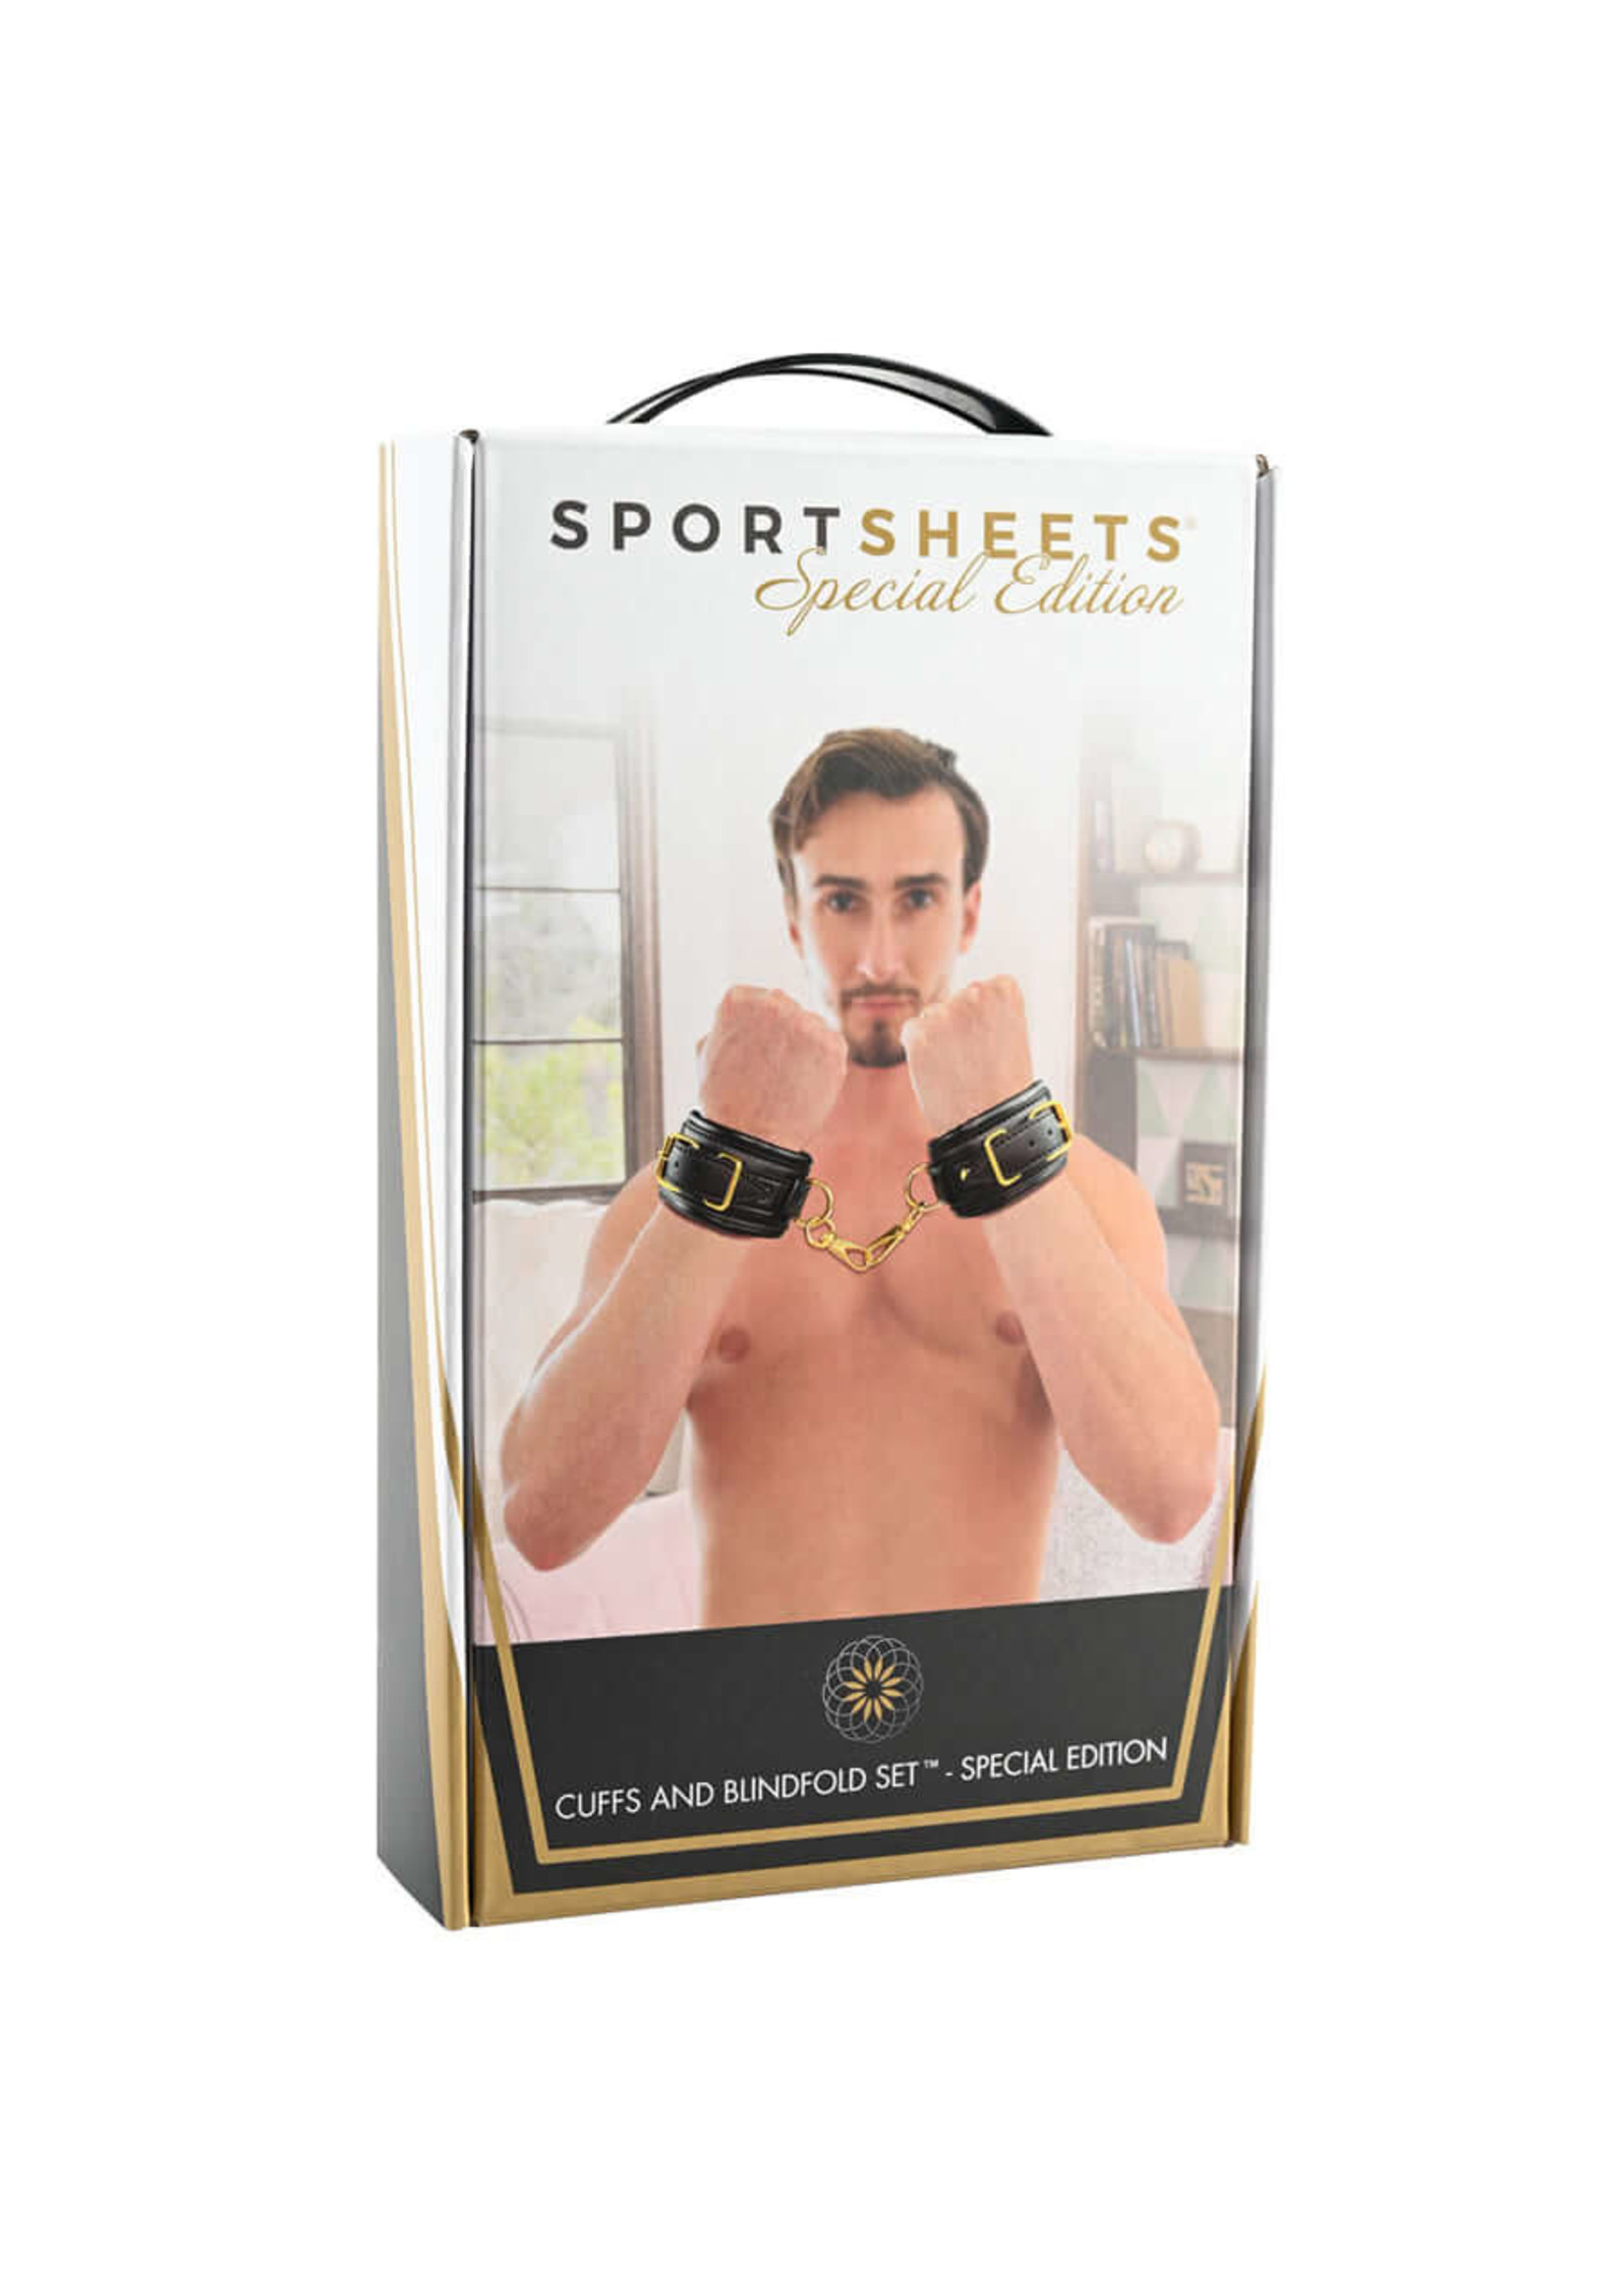 Sportsheets Cuffs And Blindfold Set Special Edition